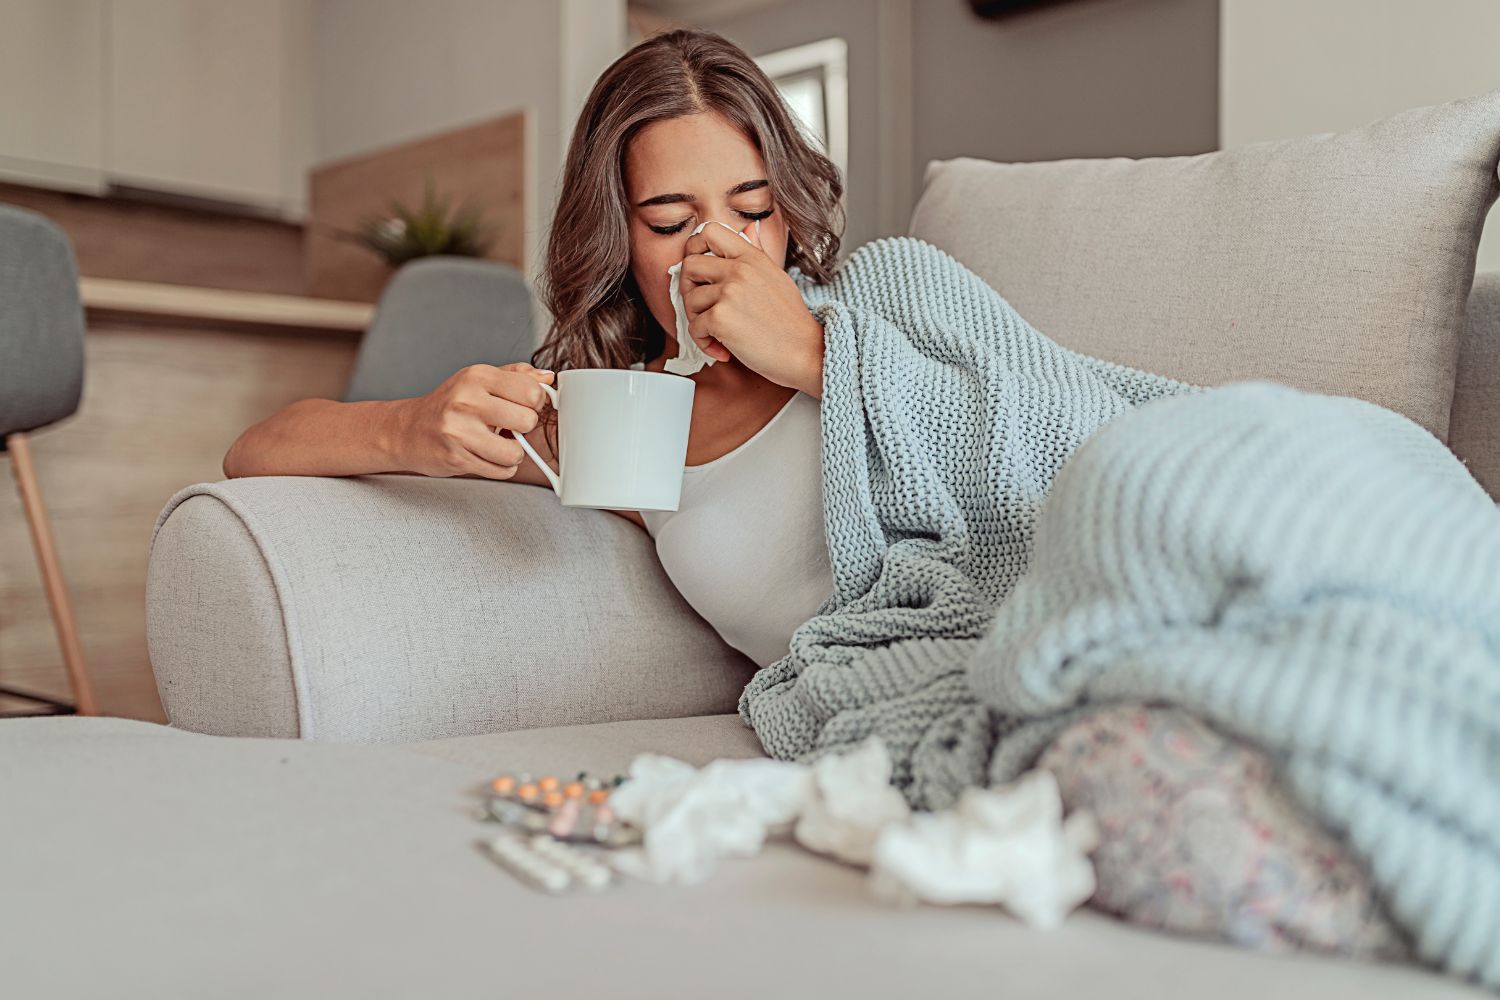 Follow these winter health tips during cold and flu season